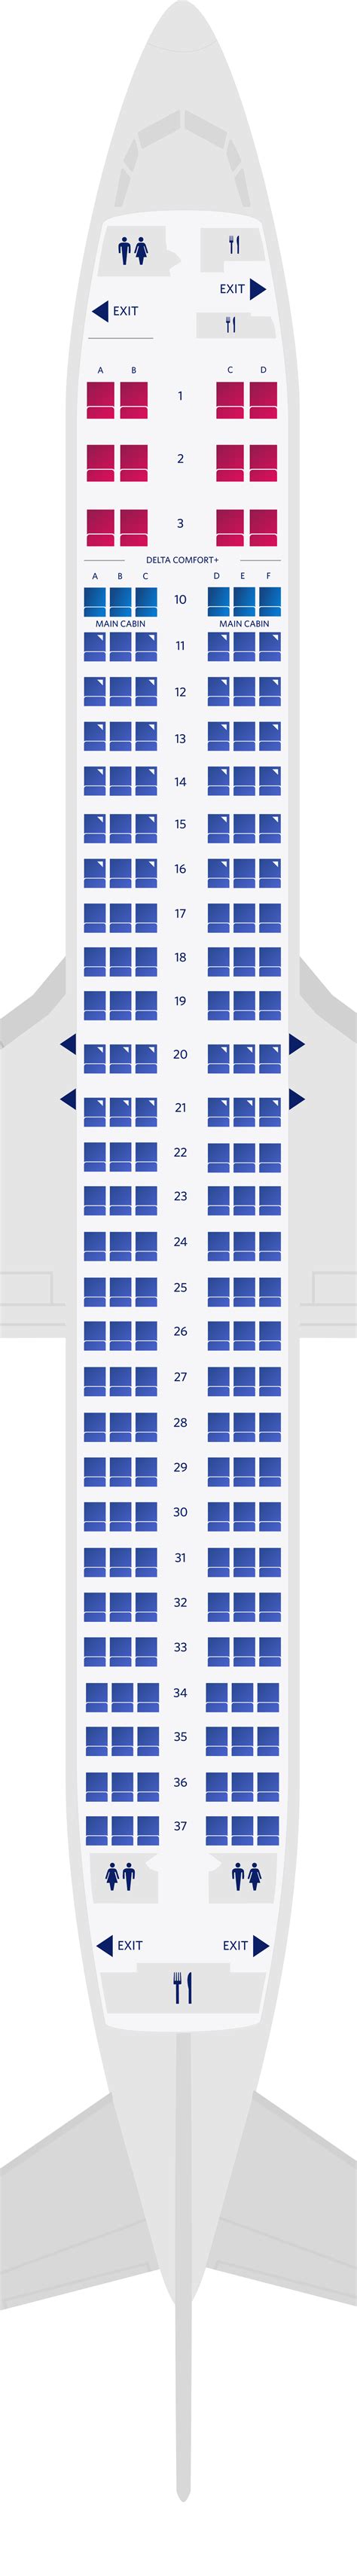 Boeing Seating Chart Delta Awesome Home